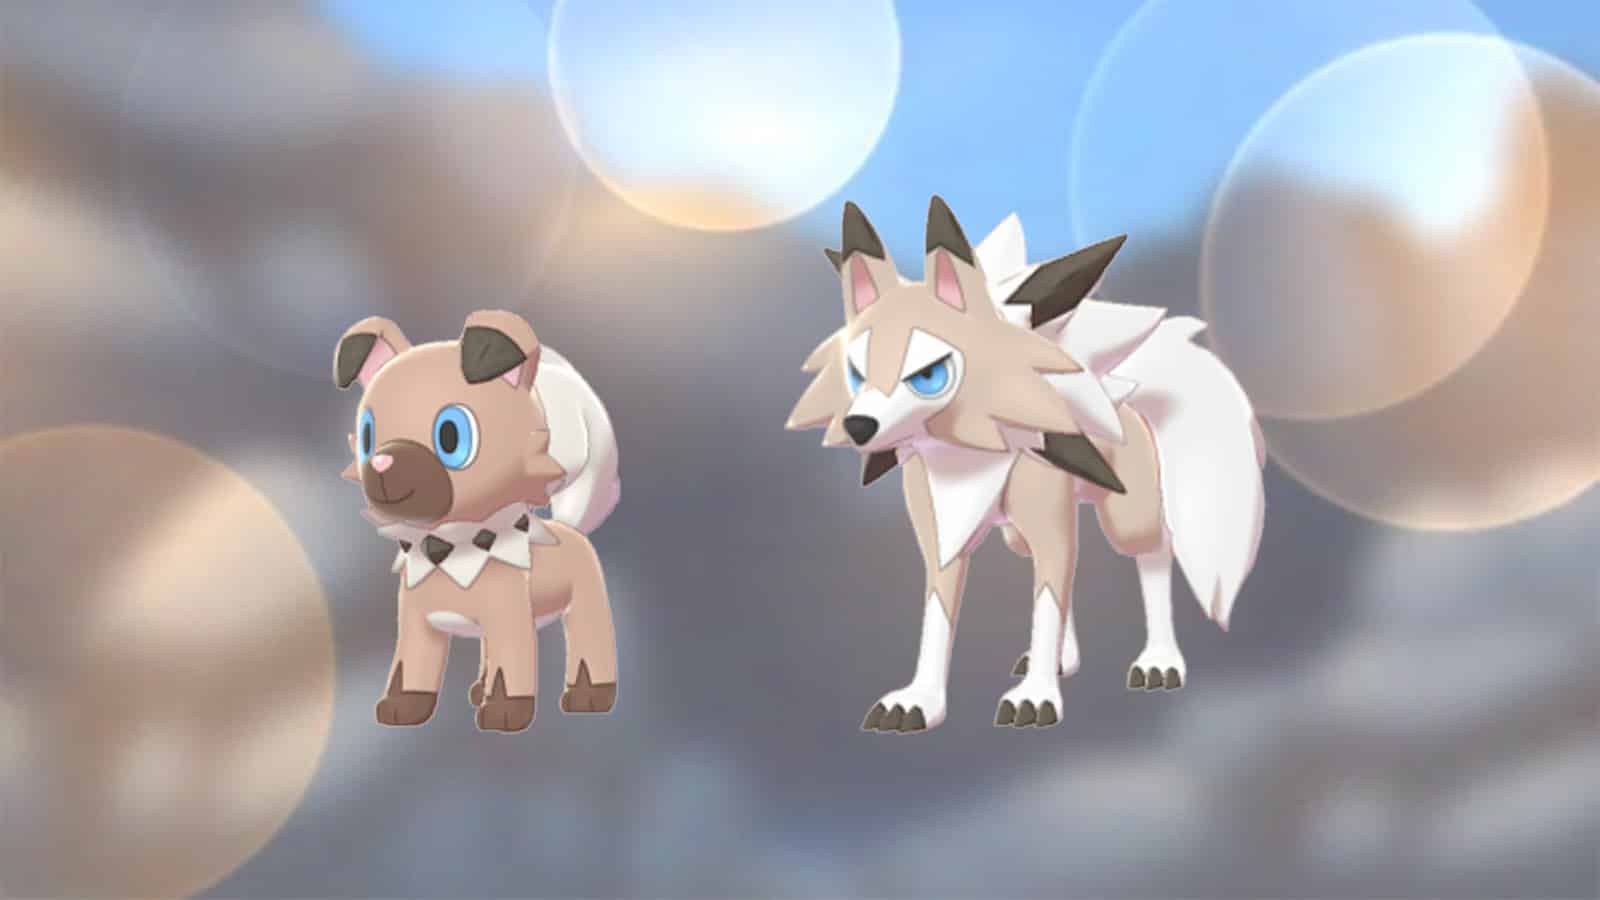 Rockruff evolving into Midday Lycanroc - one of its two evolutions - in Pokemon Go.